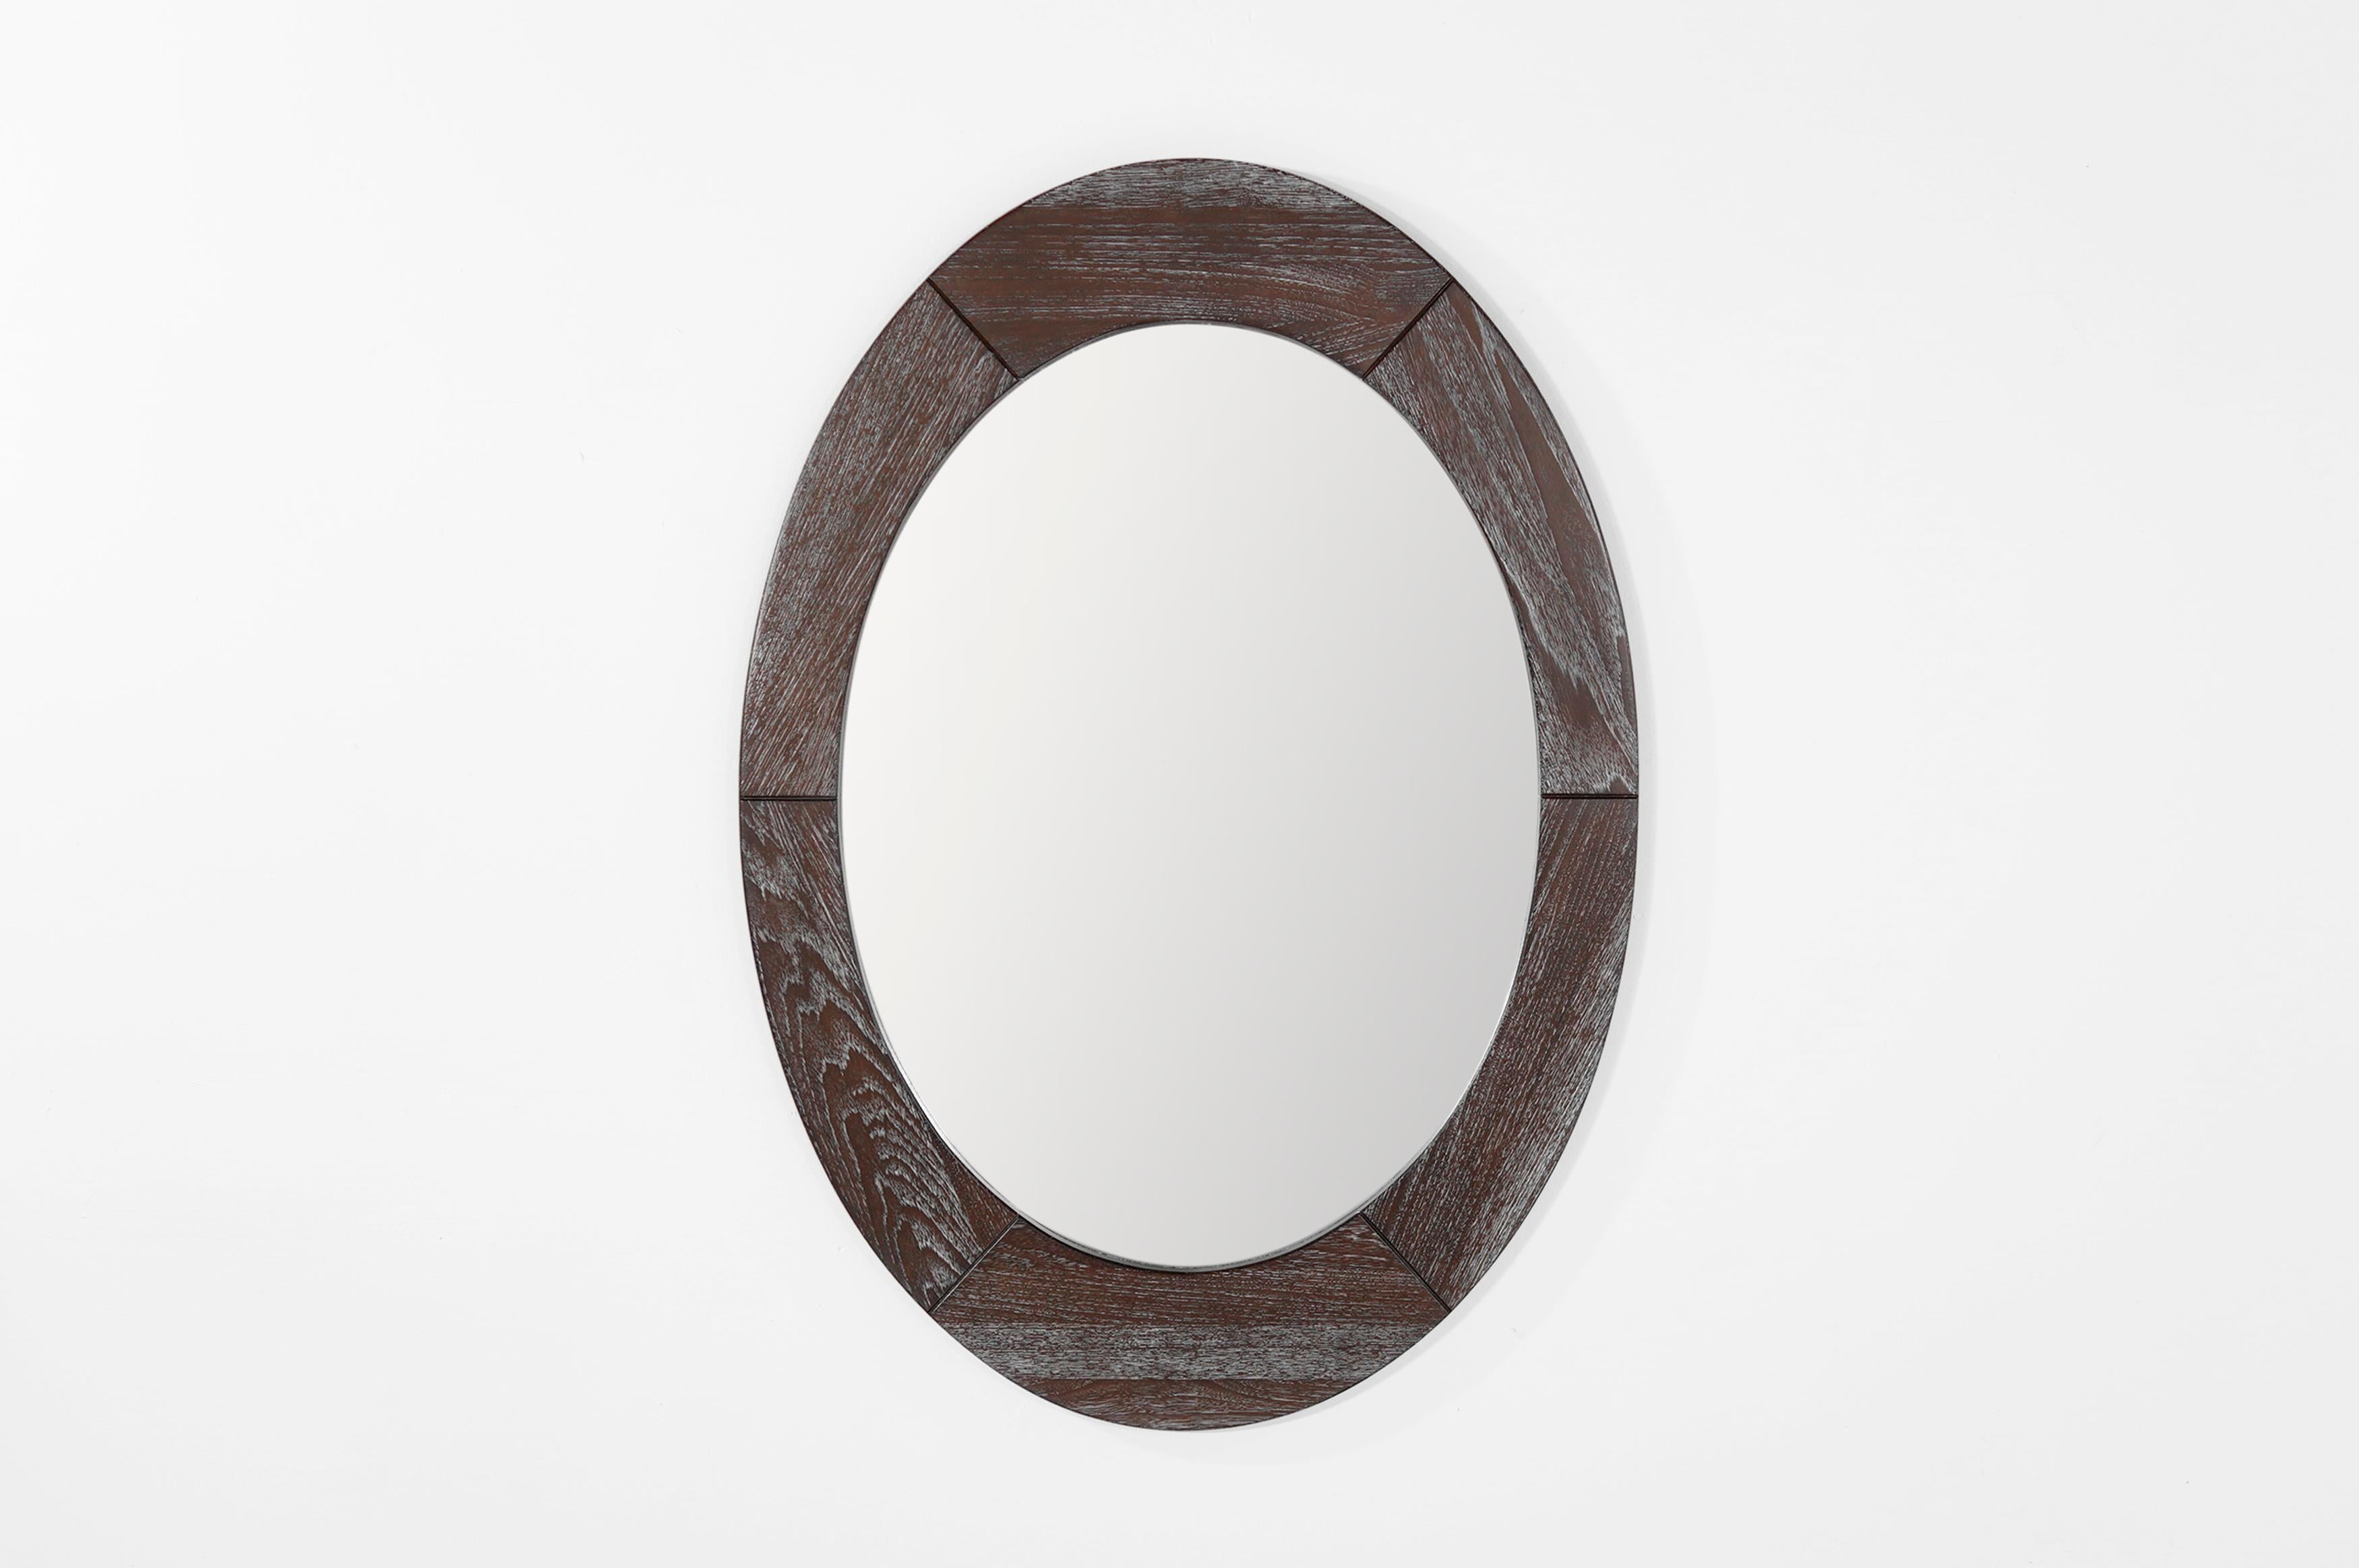 Scandinavian Modern Mirror by Pedersen & Hansen, meticulously restored by Stamford Modern. This iconic piece embodies timeless Scandinavian design, showcasing clean lines and functionality synonymous with the brand. Carefully rejuvenated while